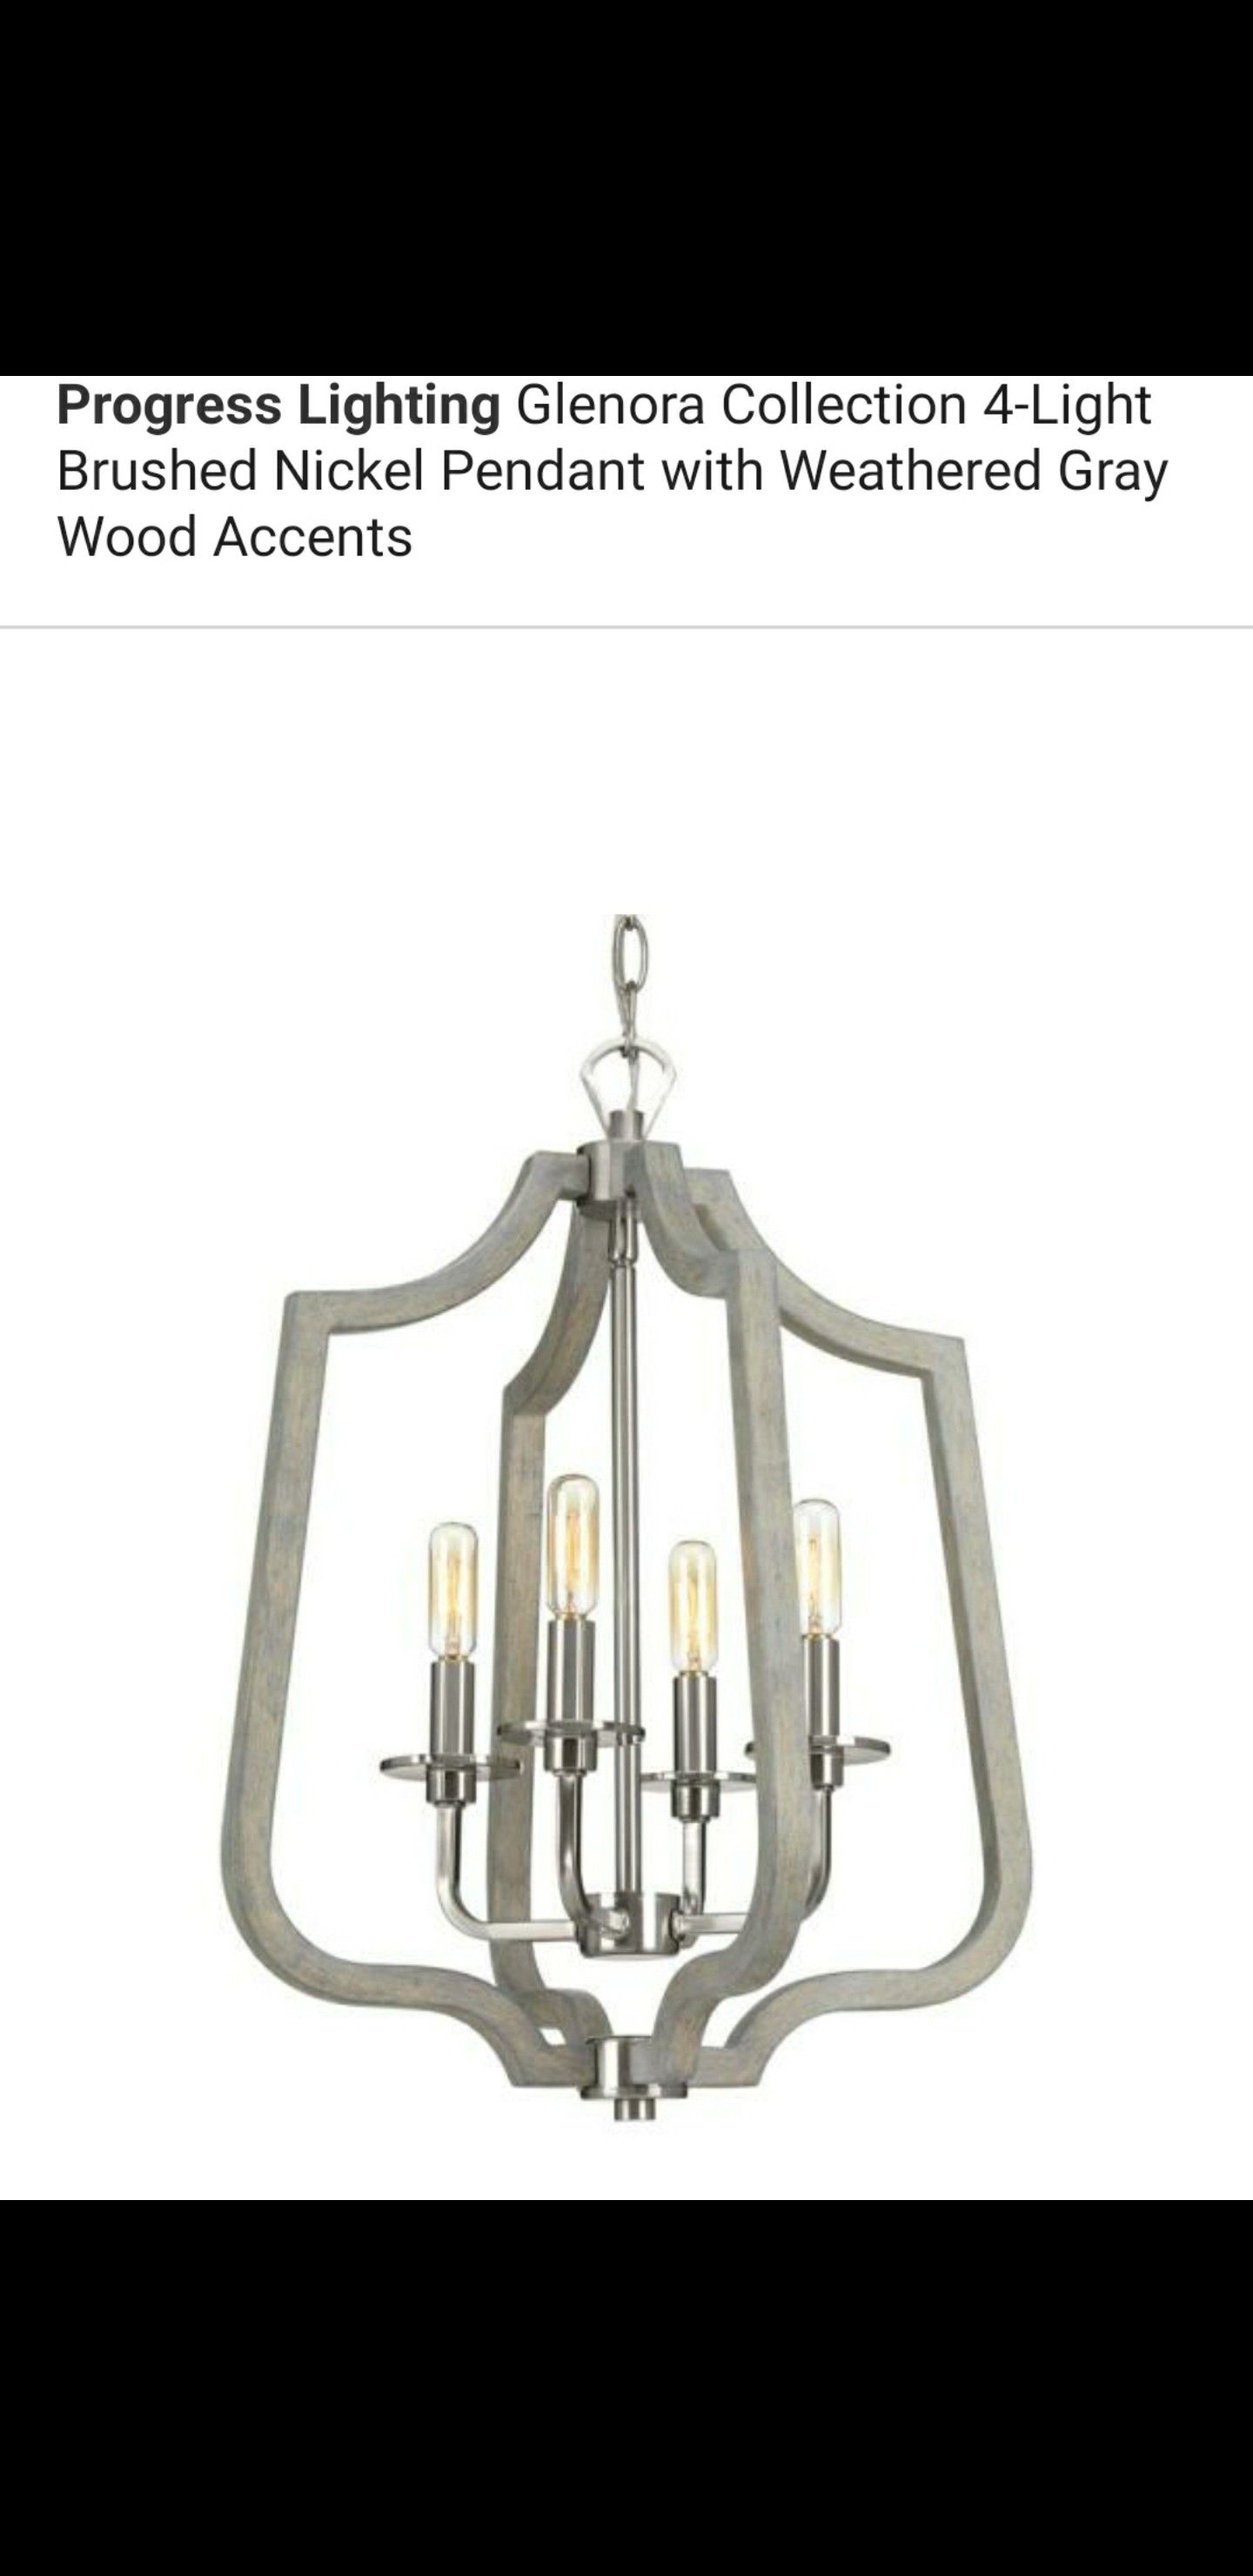 4 light brushed nickel pendant with wood accents